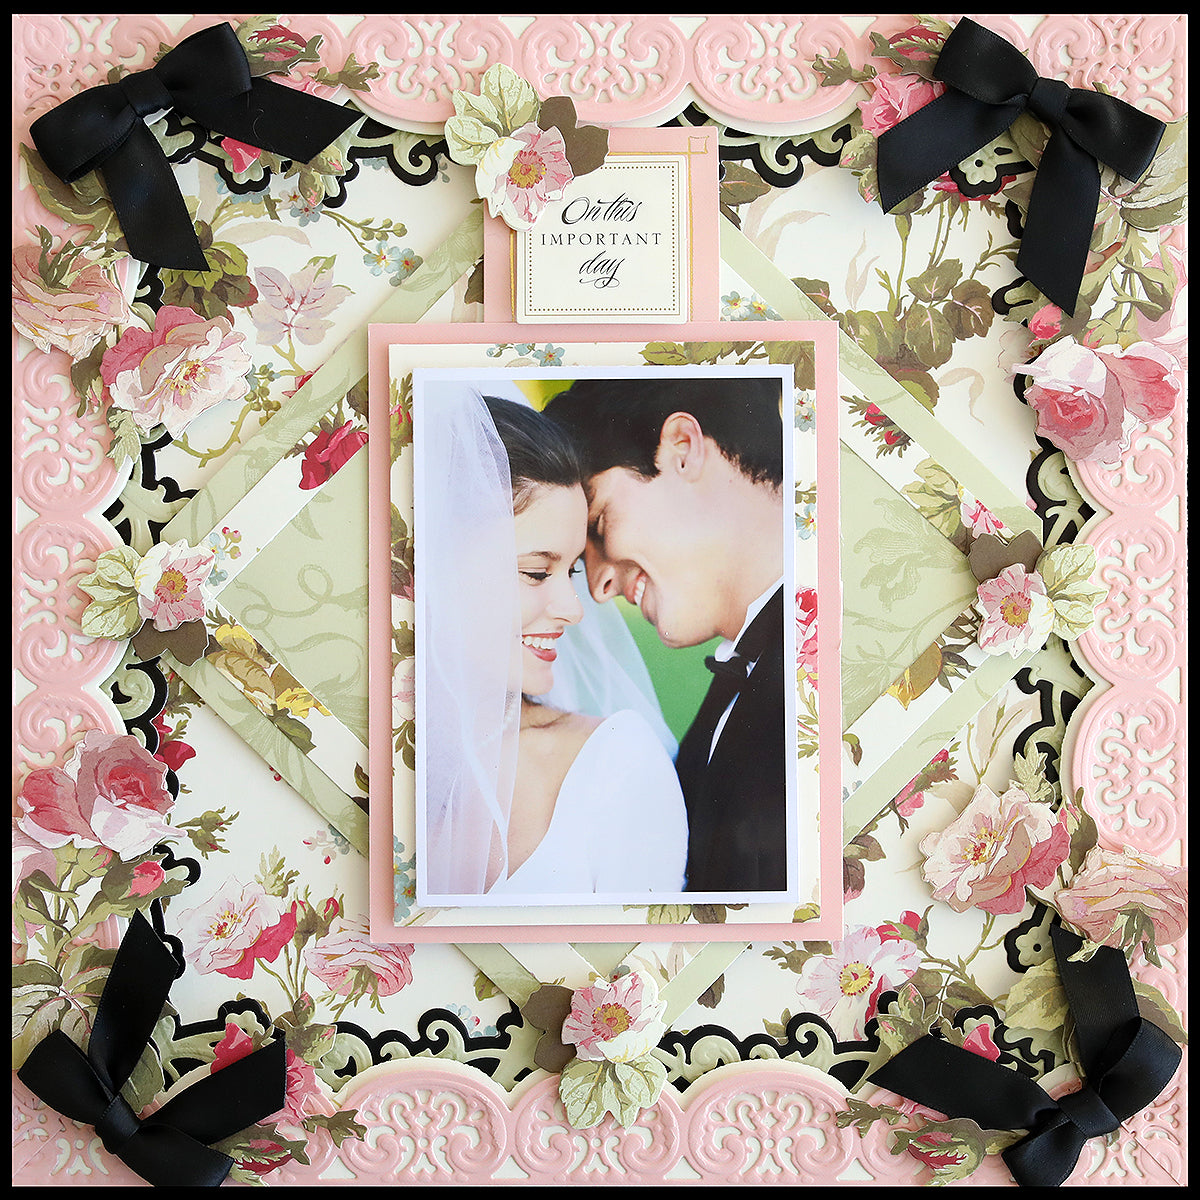 Anna's first design features a frame adorned with floral designs, perfect for scrapbooking memories of the Anniversary Paper Crafting Collection.